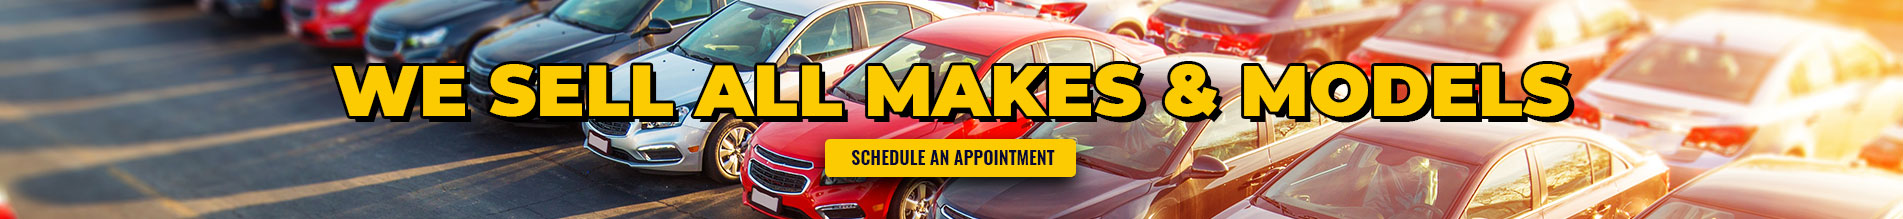 Schedule an appointment at Miyan Motors